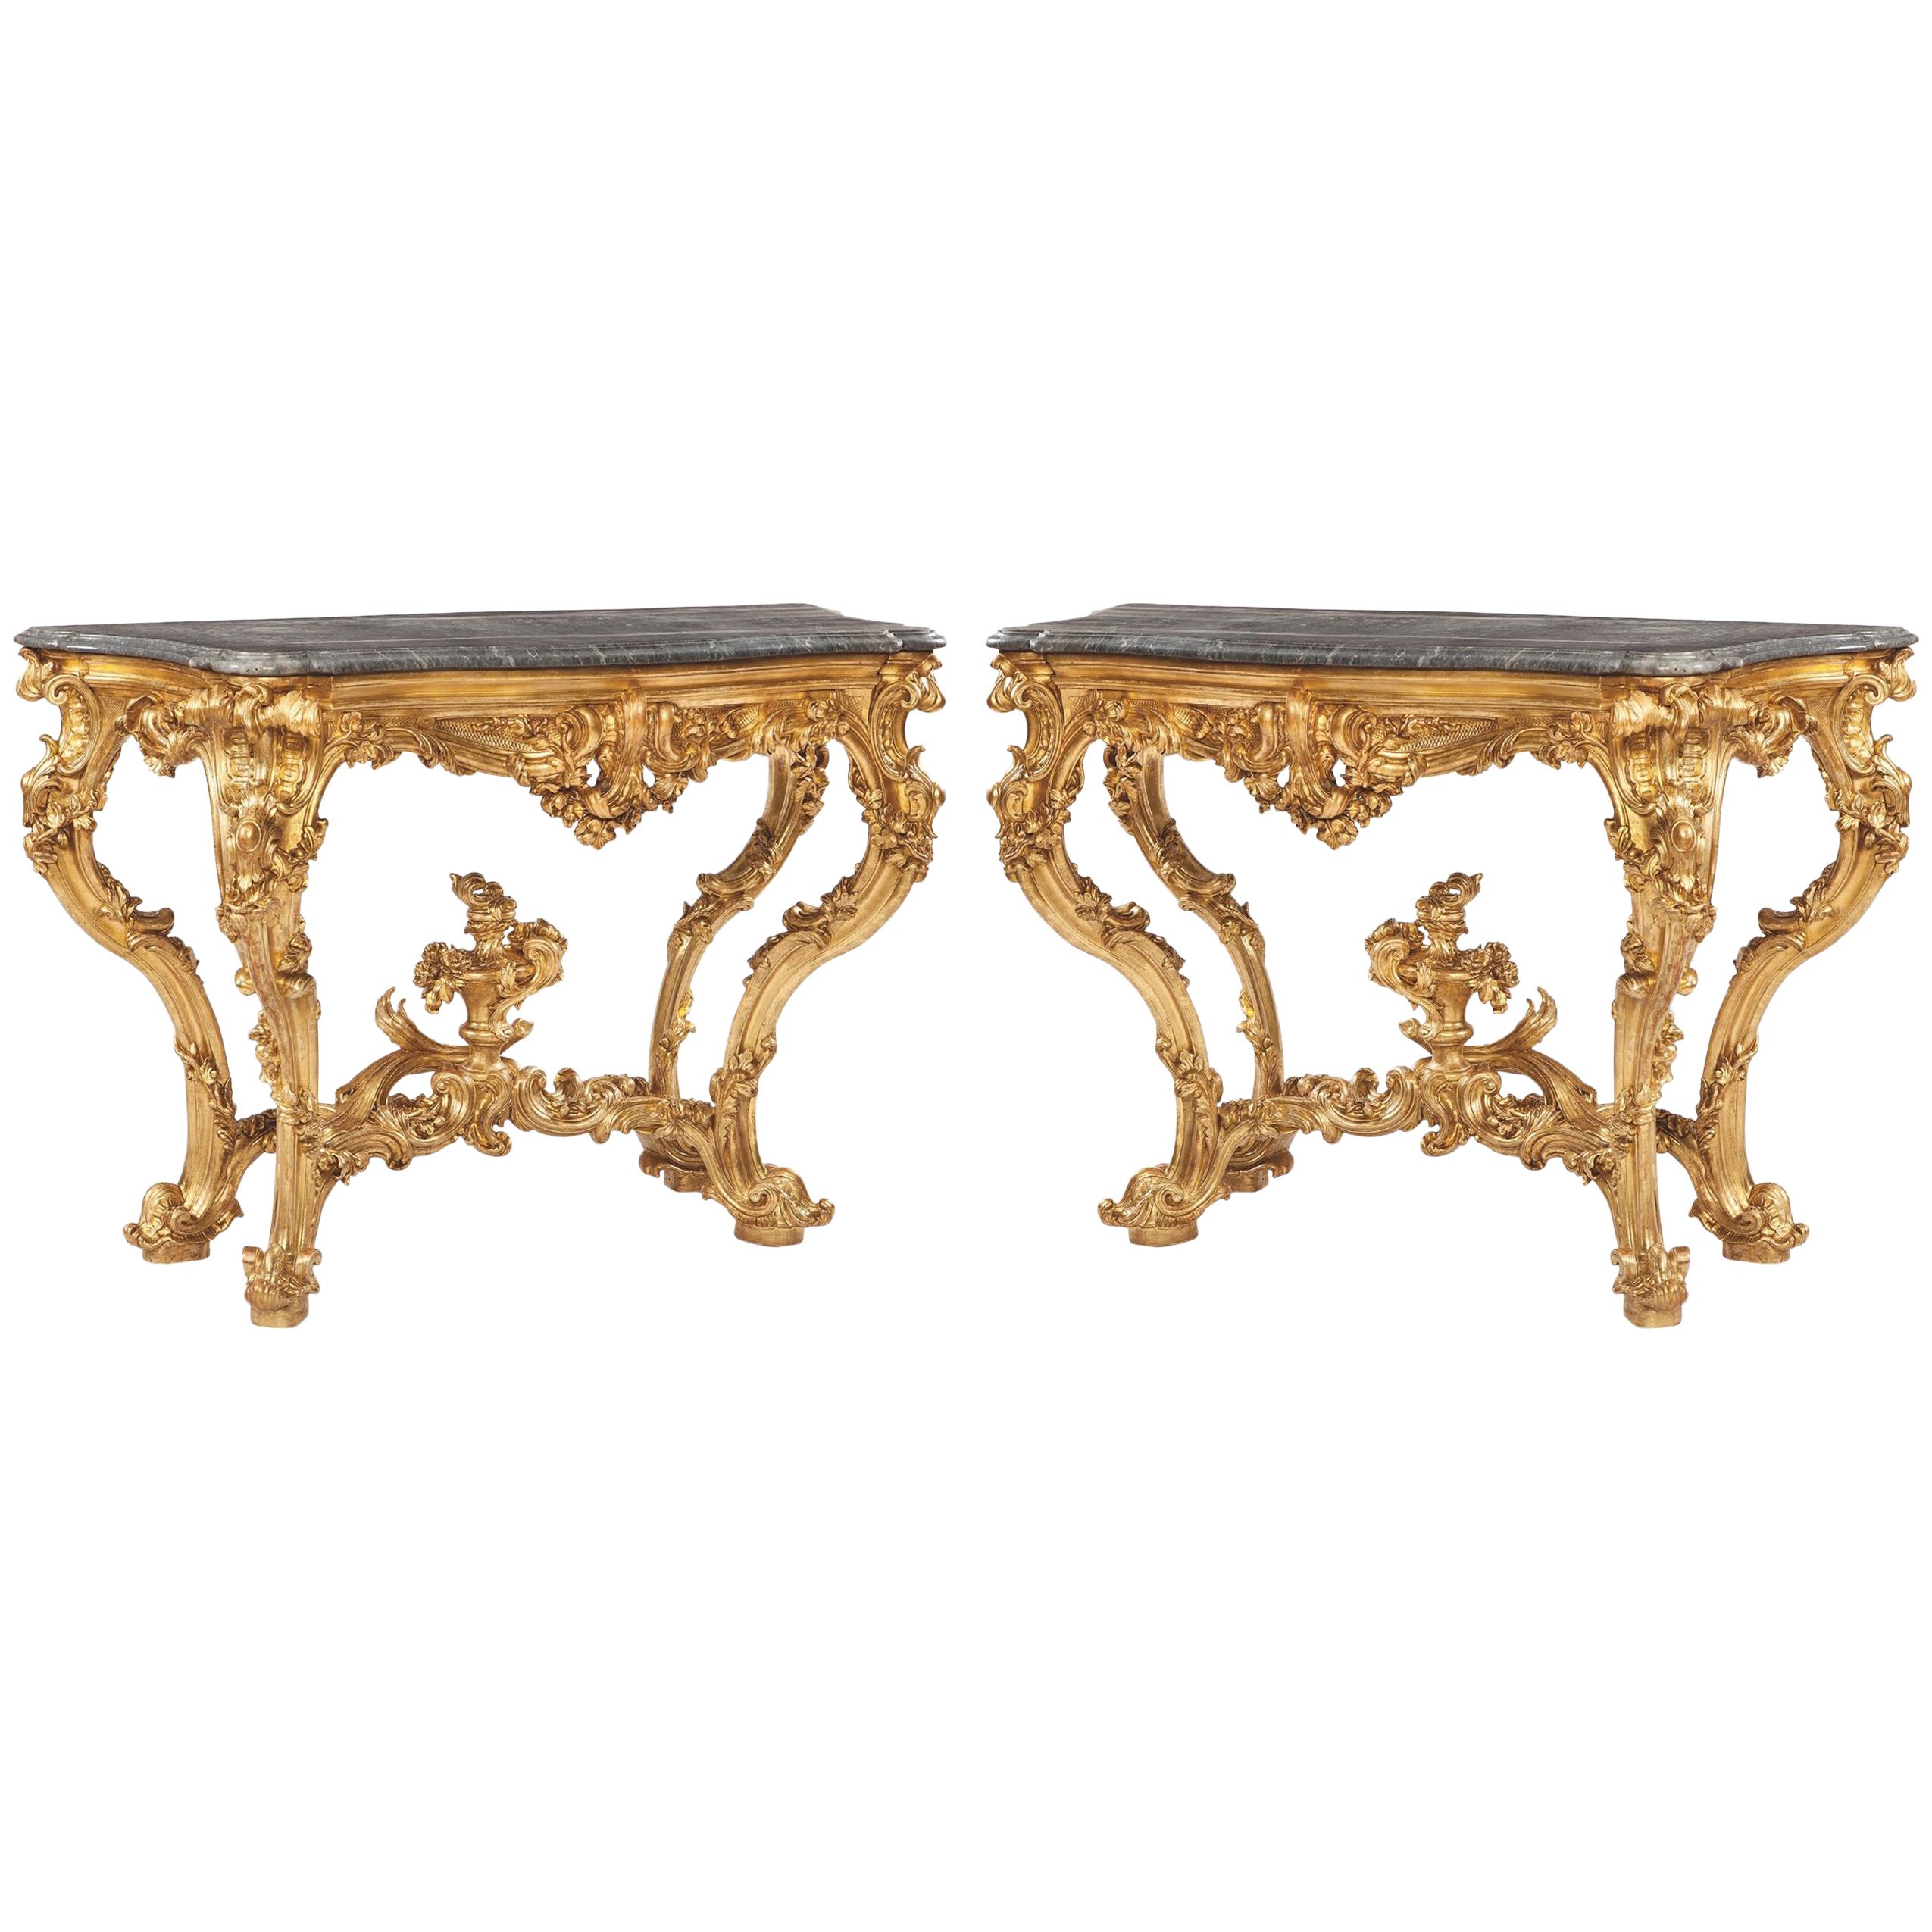 Pair of 18th Century Rococo Northern Italian Giltwood and Marble Console Tables